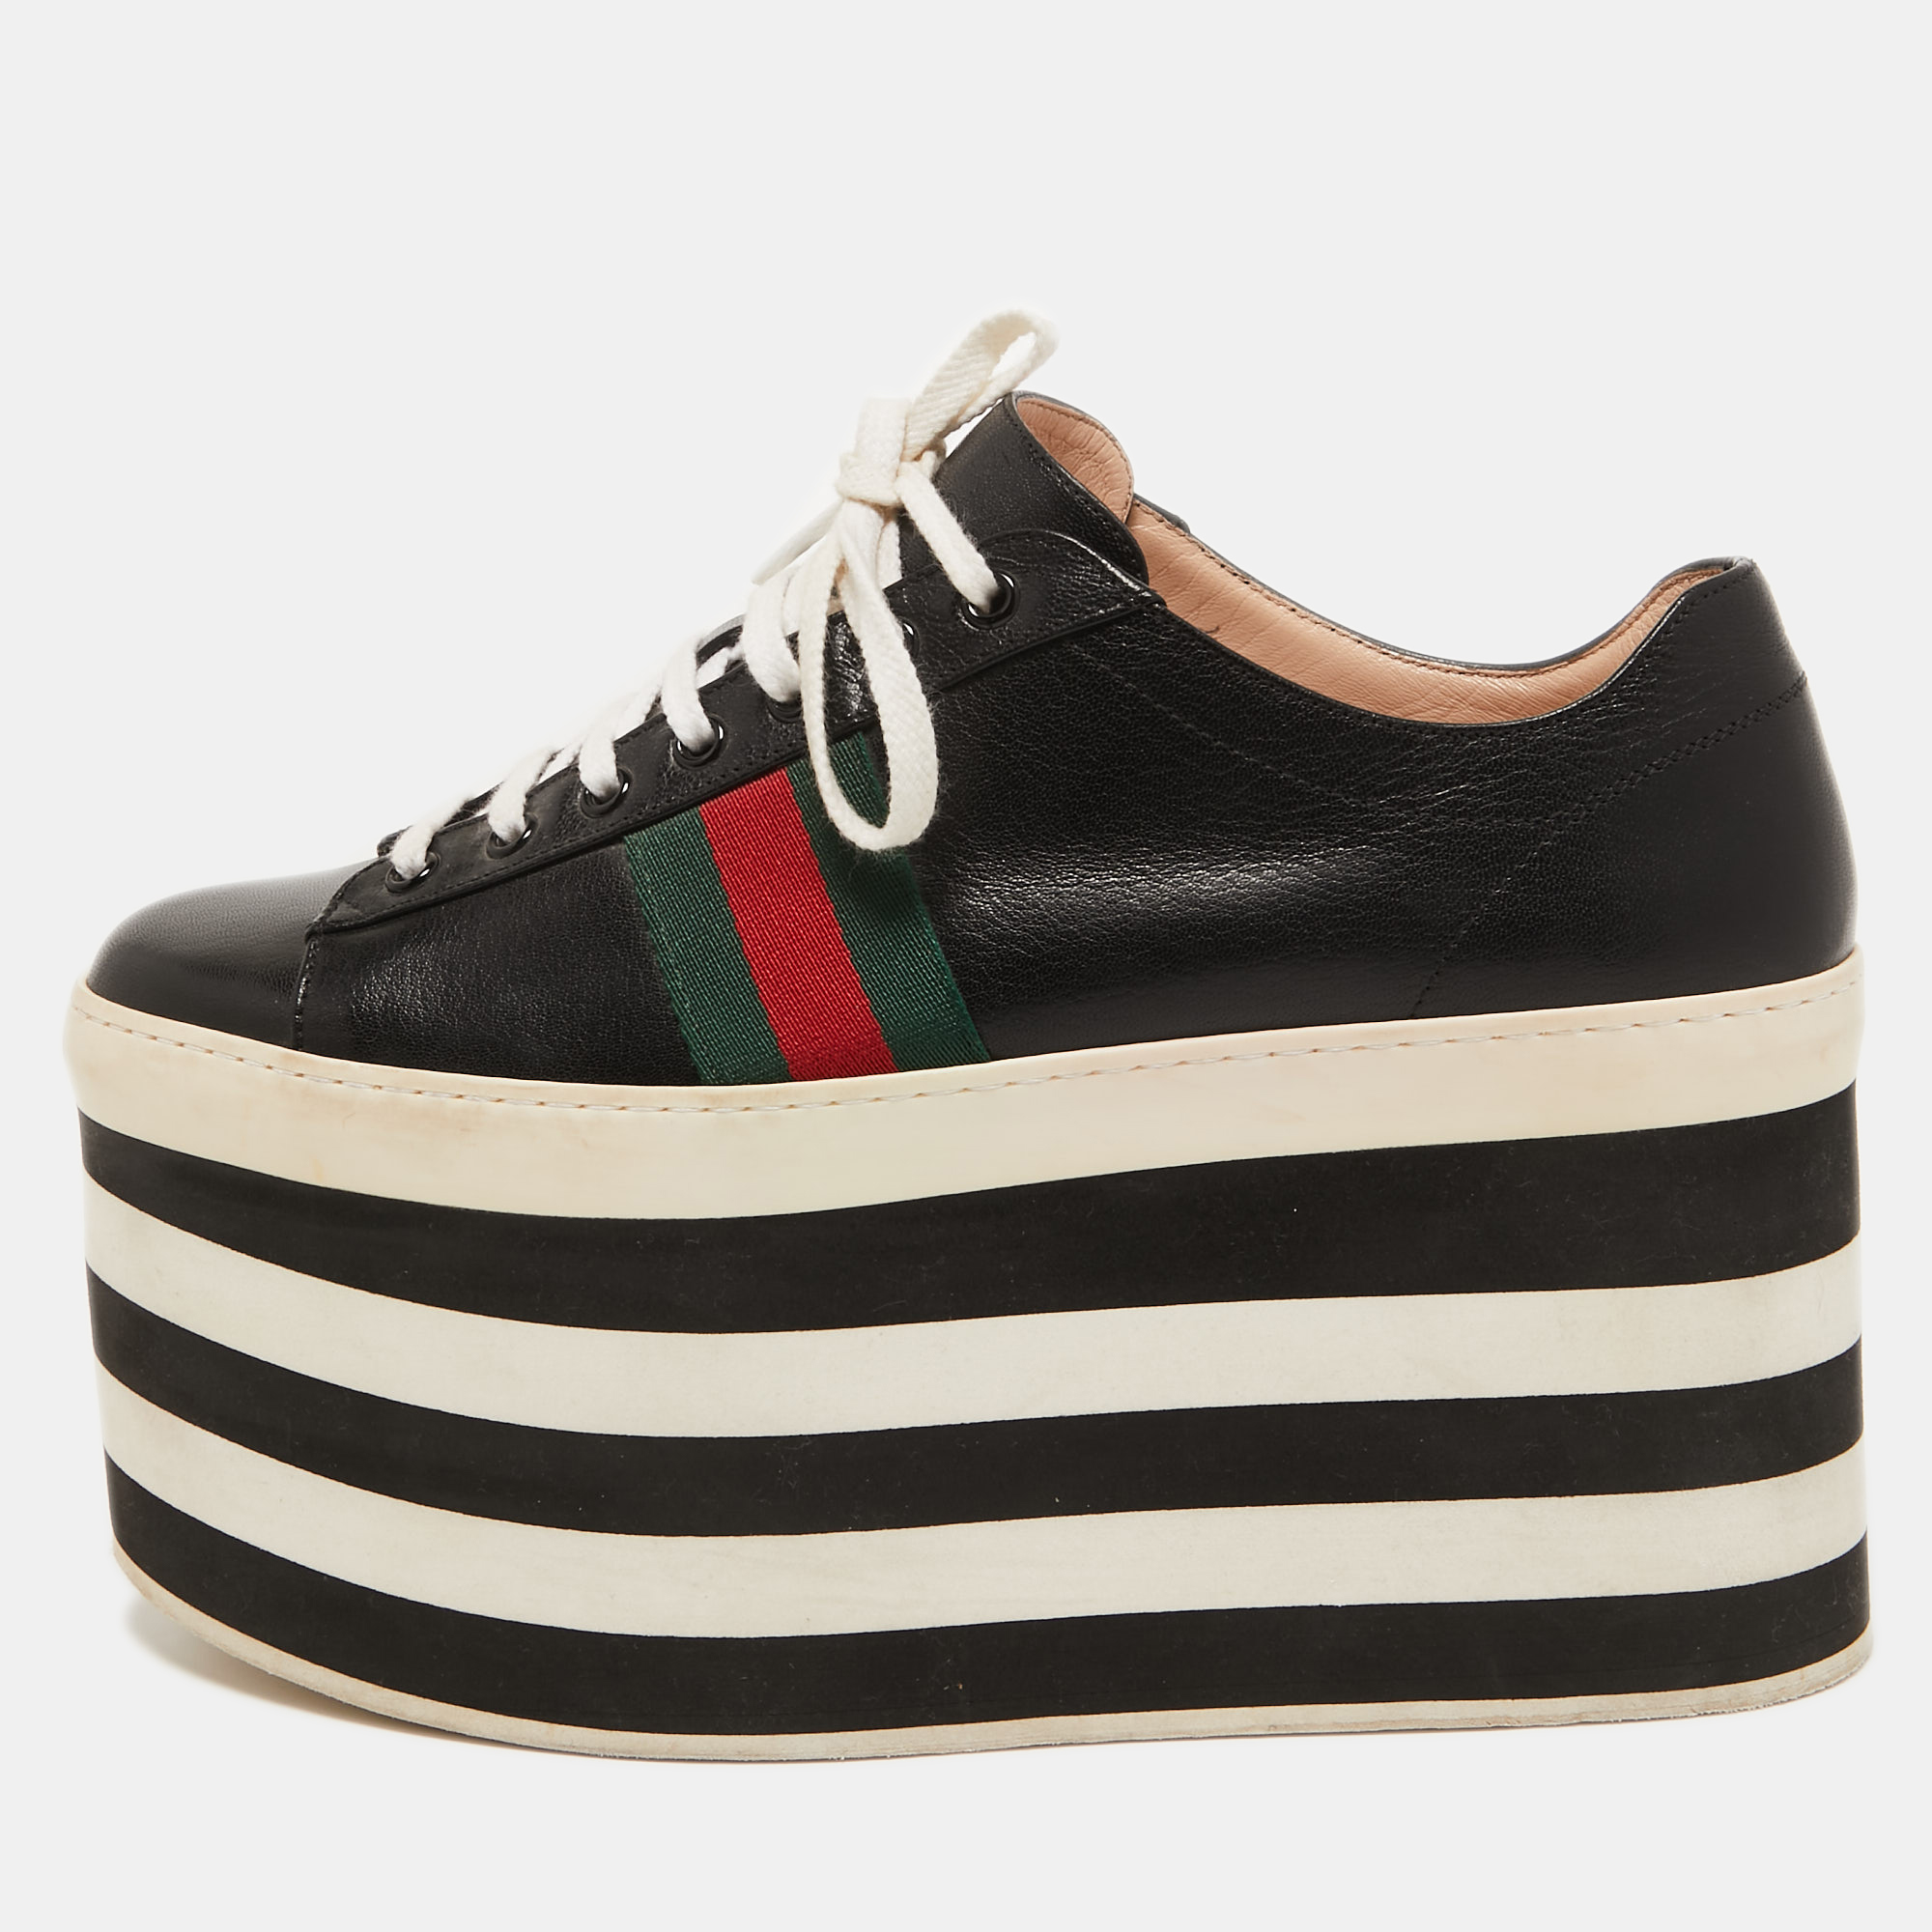 Pre-owned Gucci Black Leather Peggy Ace Platform Sneakers Size 40